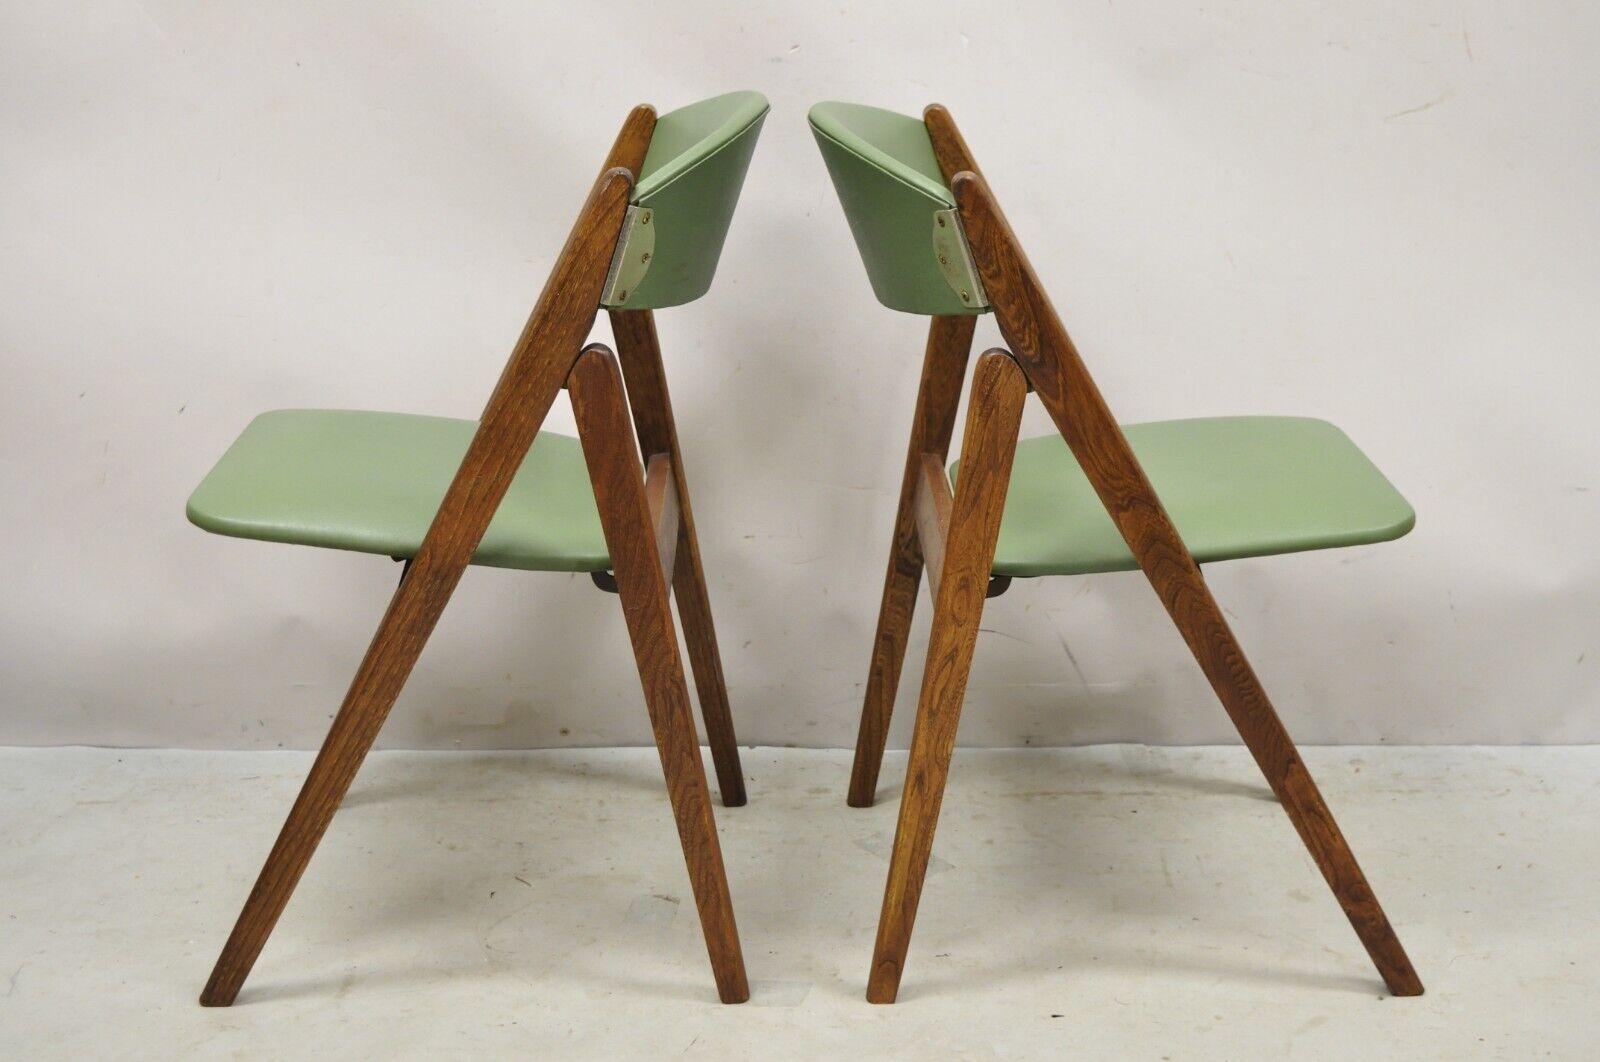 Wood Vintage Stakmore Green Mid-Century Modern Folding Game Chairs - Set of 4